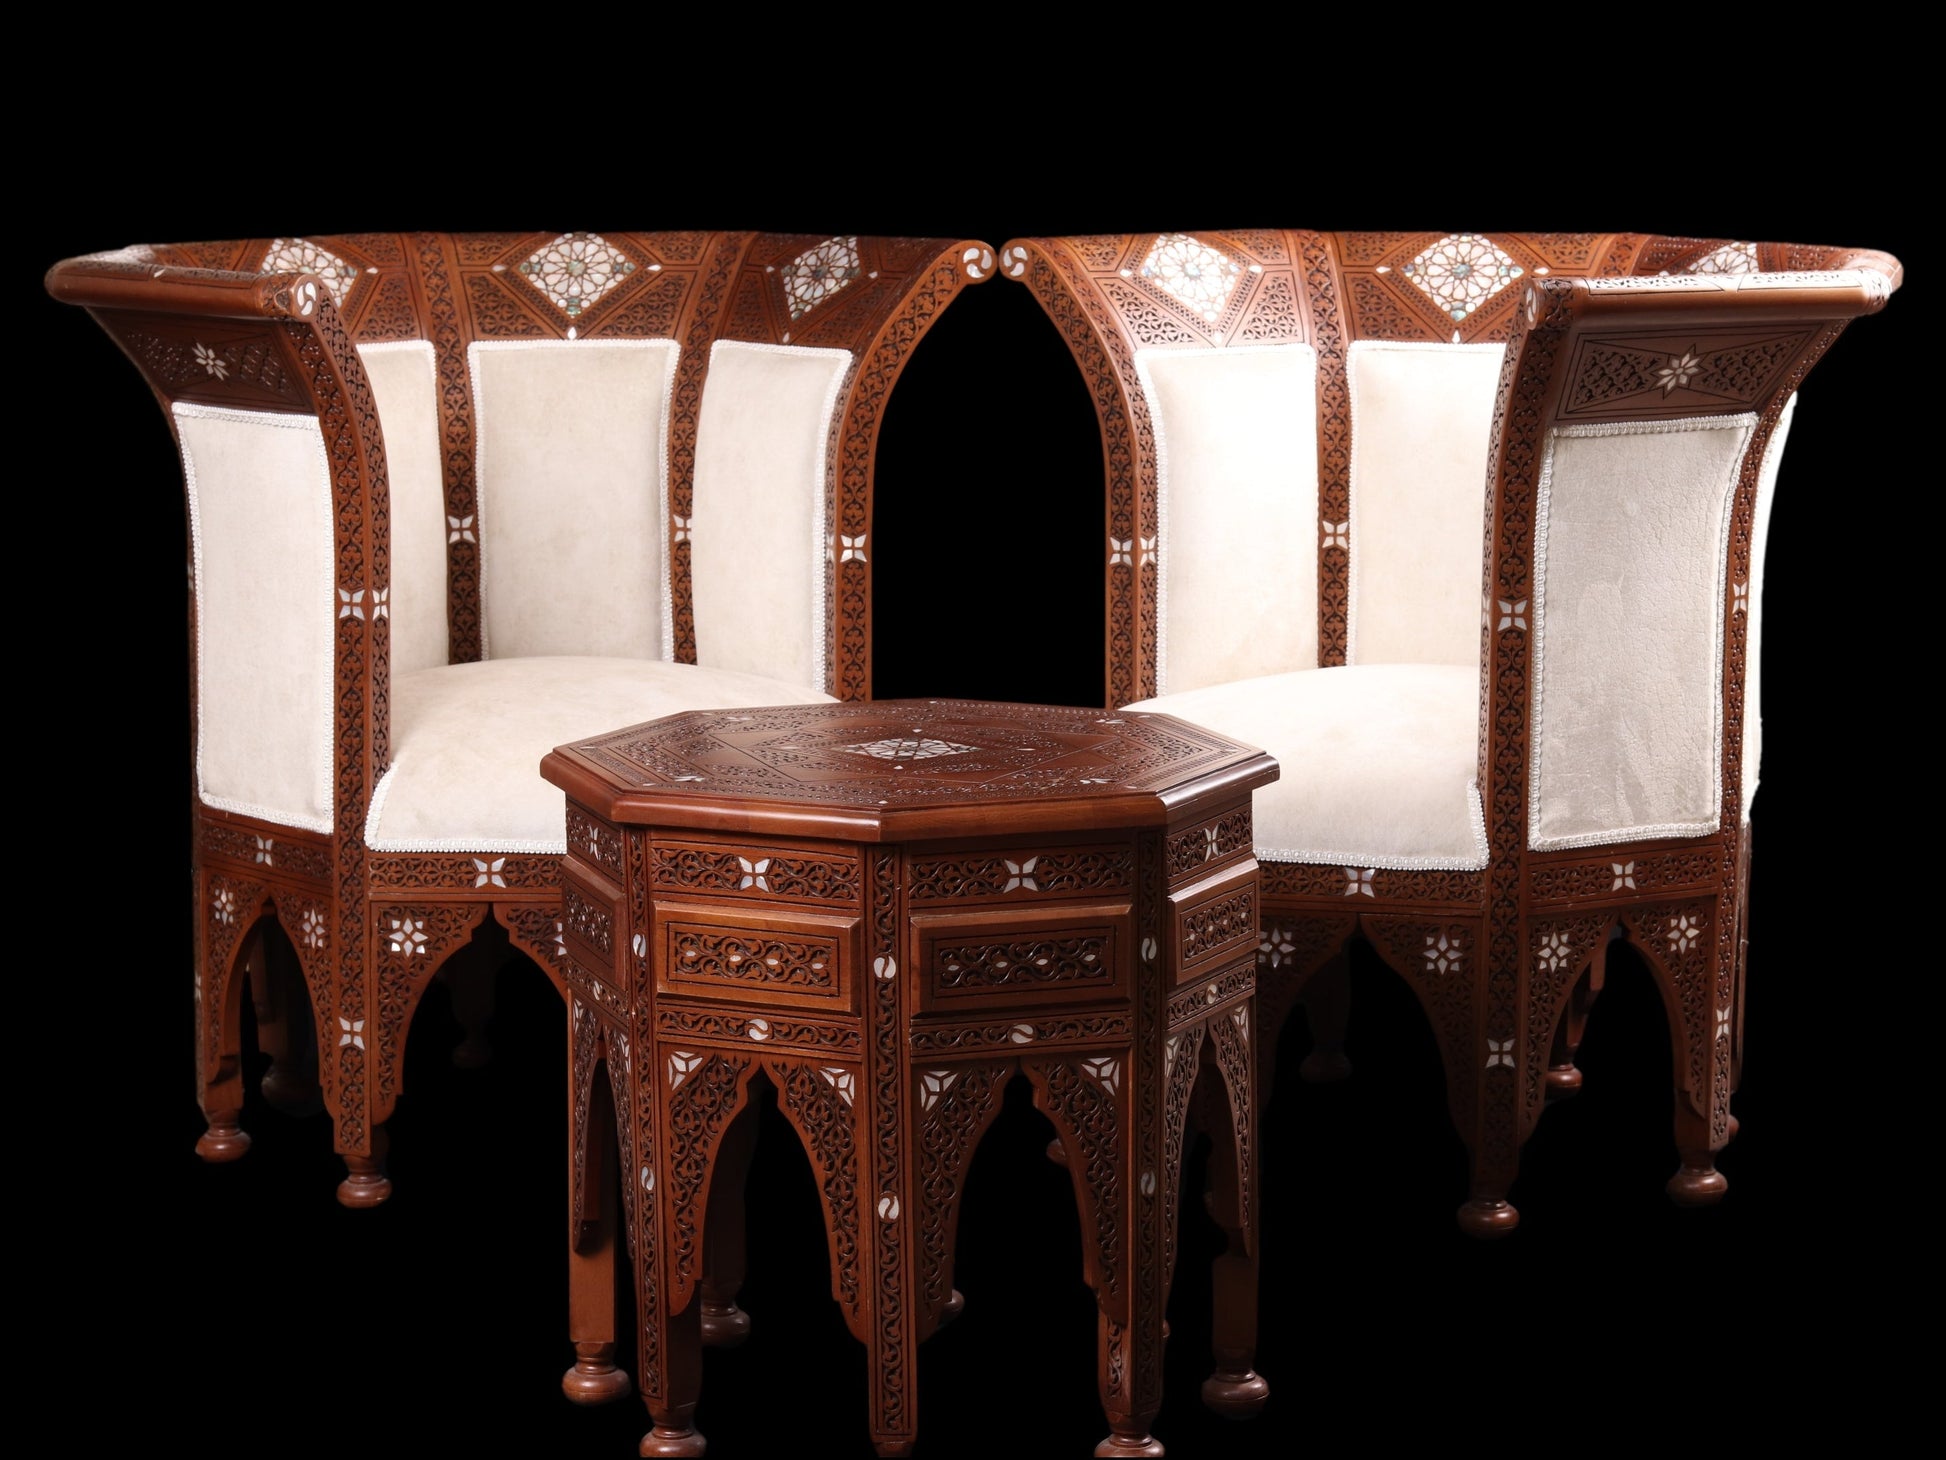 Chairs & Table Set - Carved and Inlayed